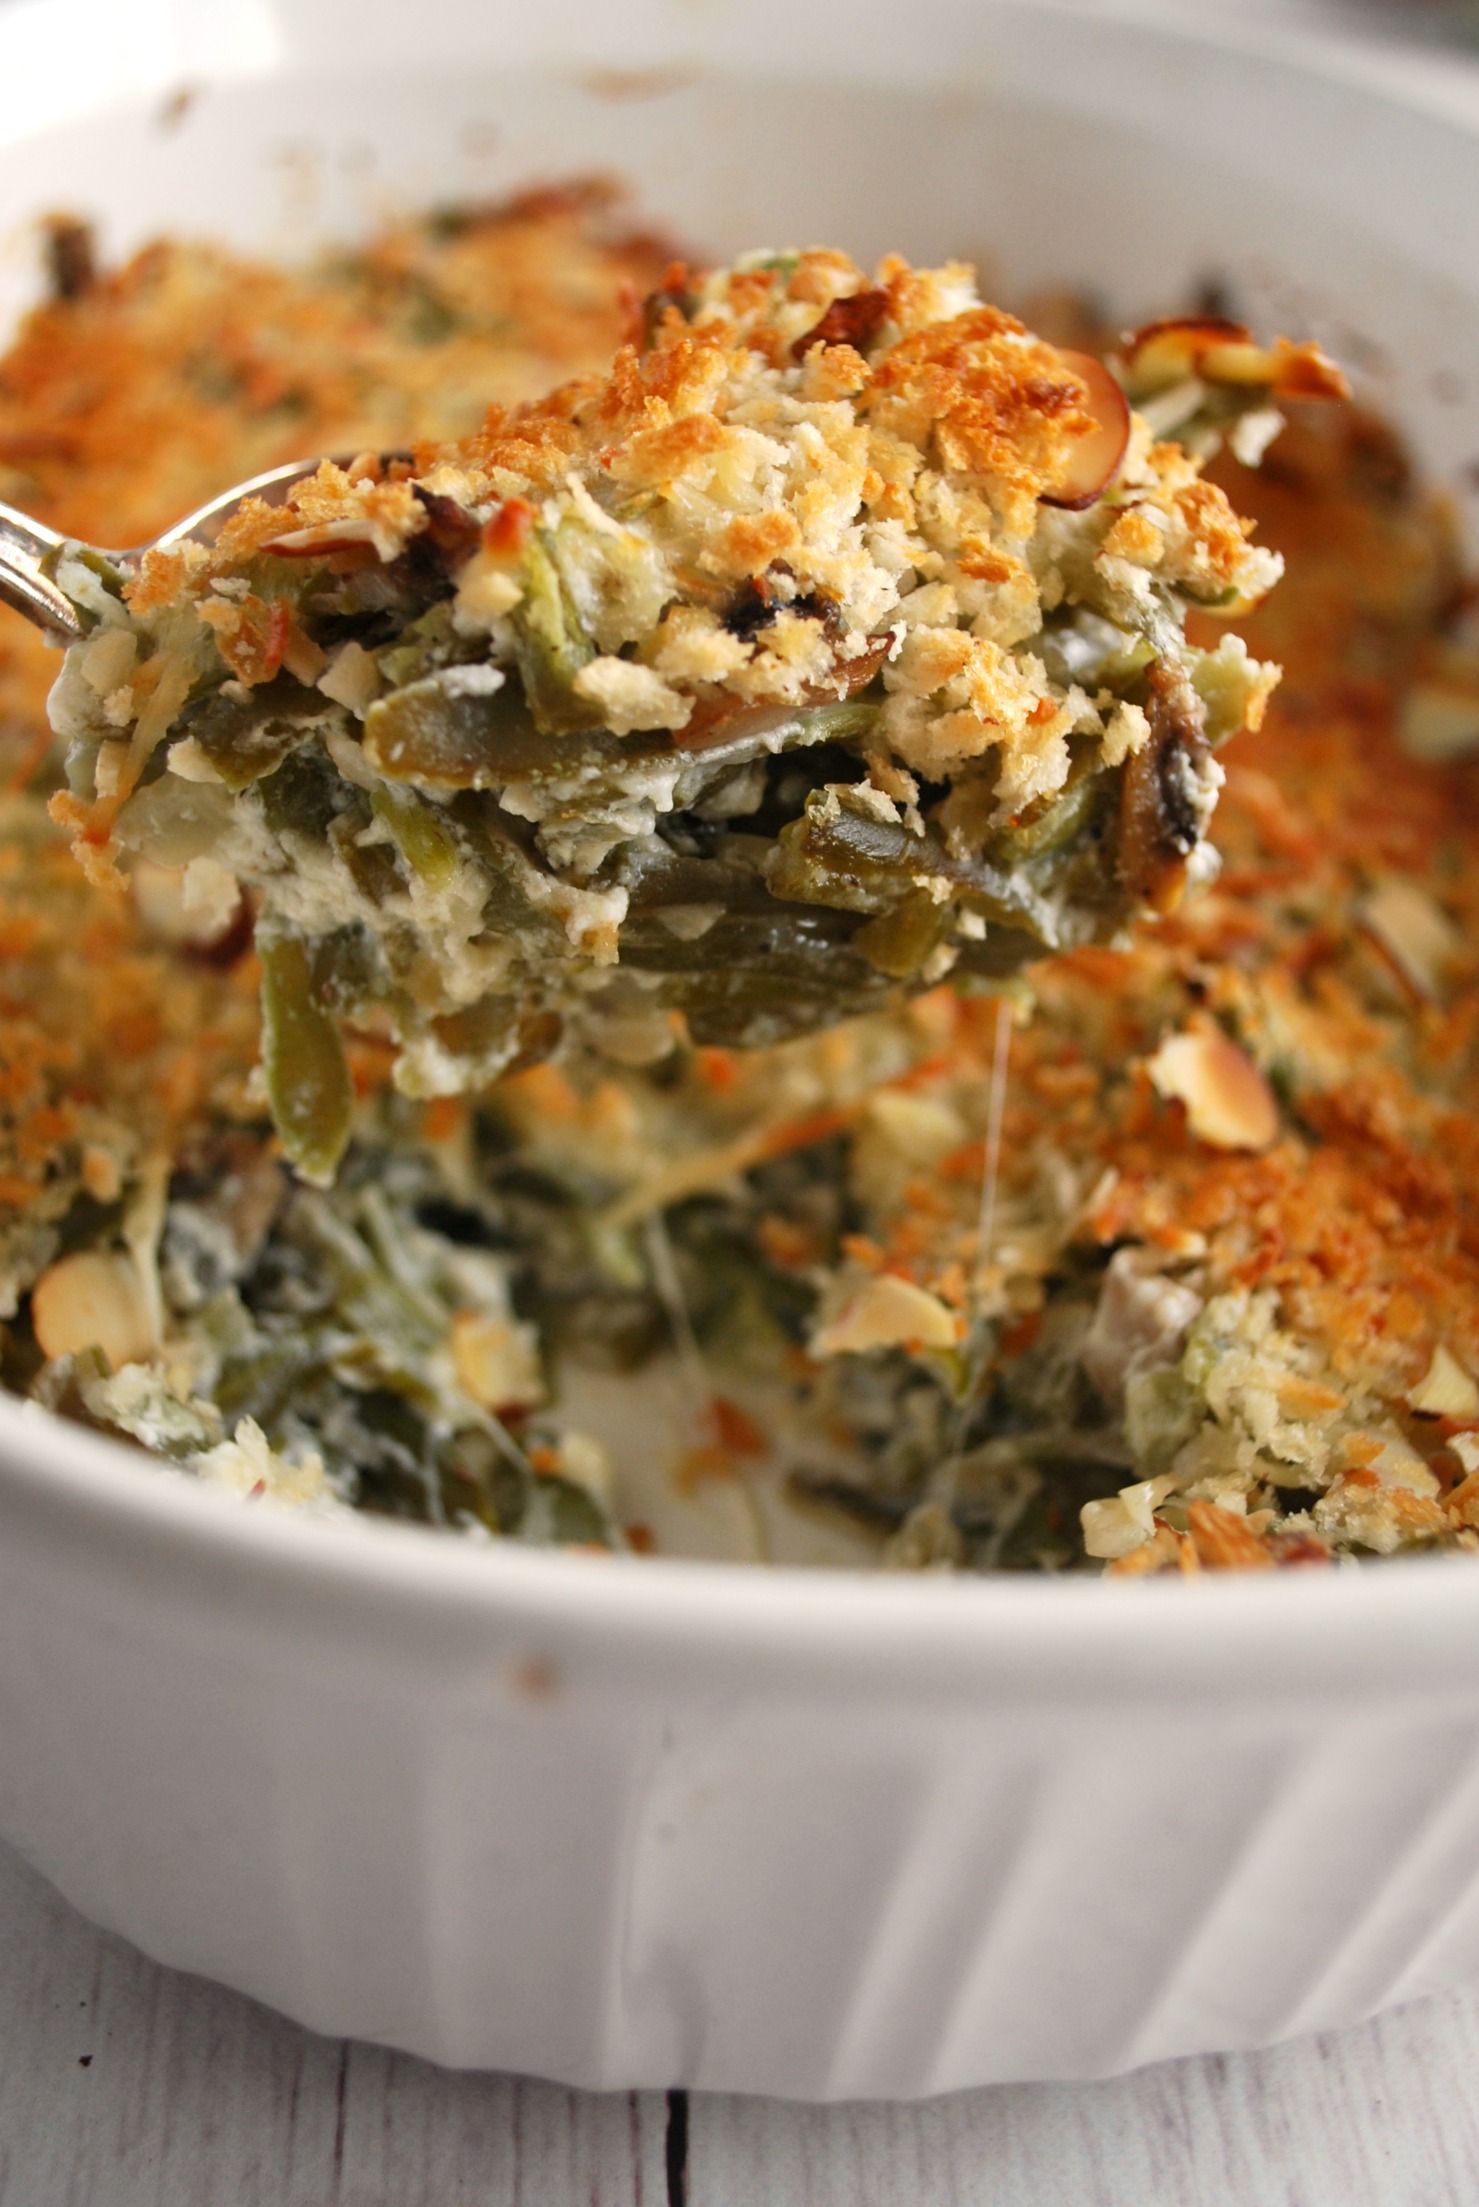 This green bean casserole is so easy and tasty! And its soup free!